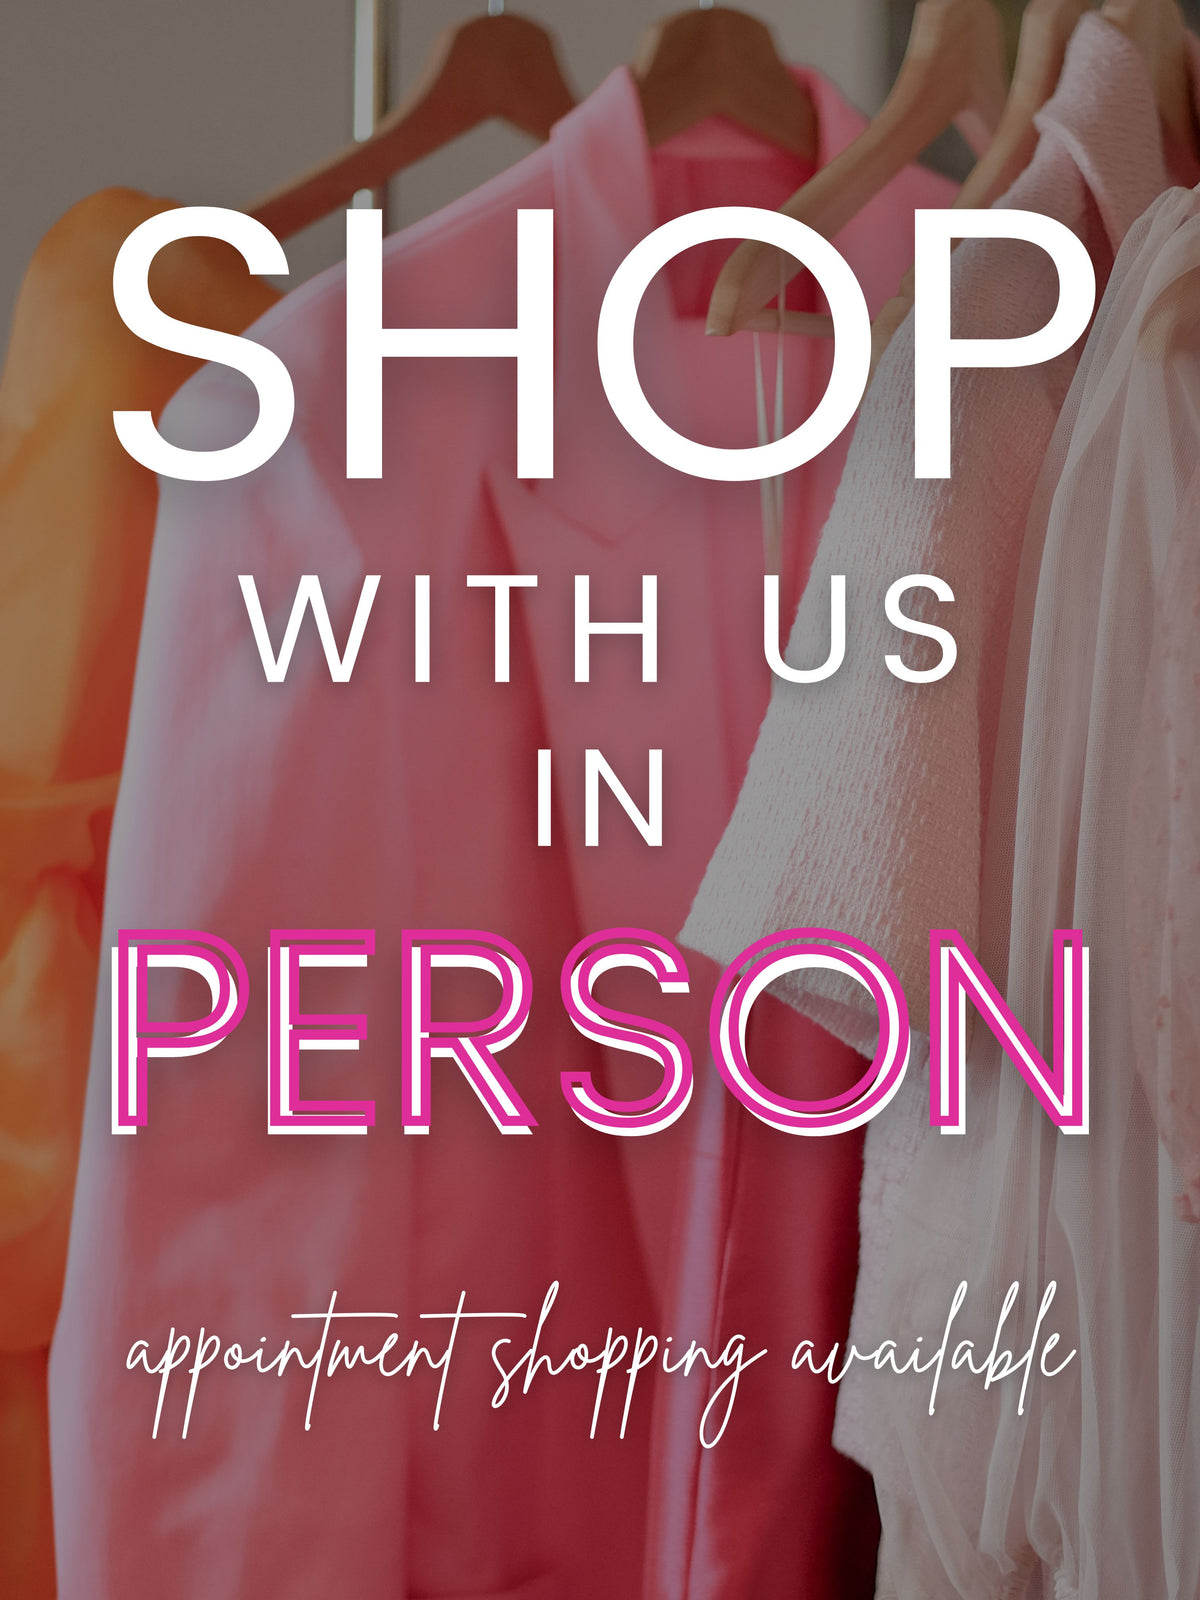 How to shop from the US with a personal shopper?